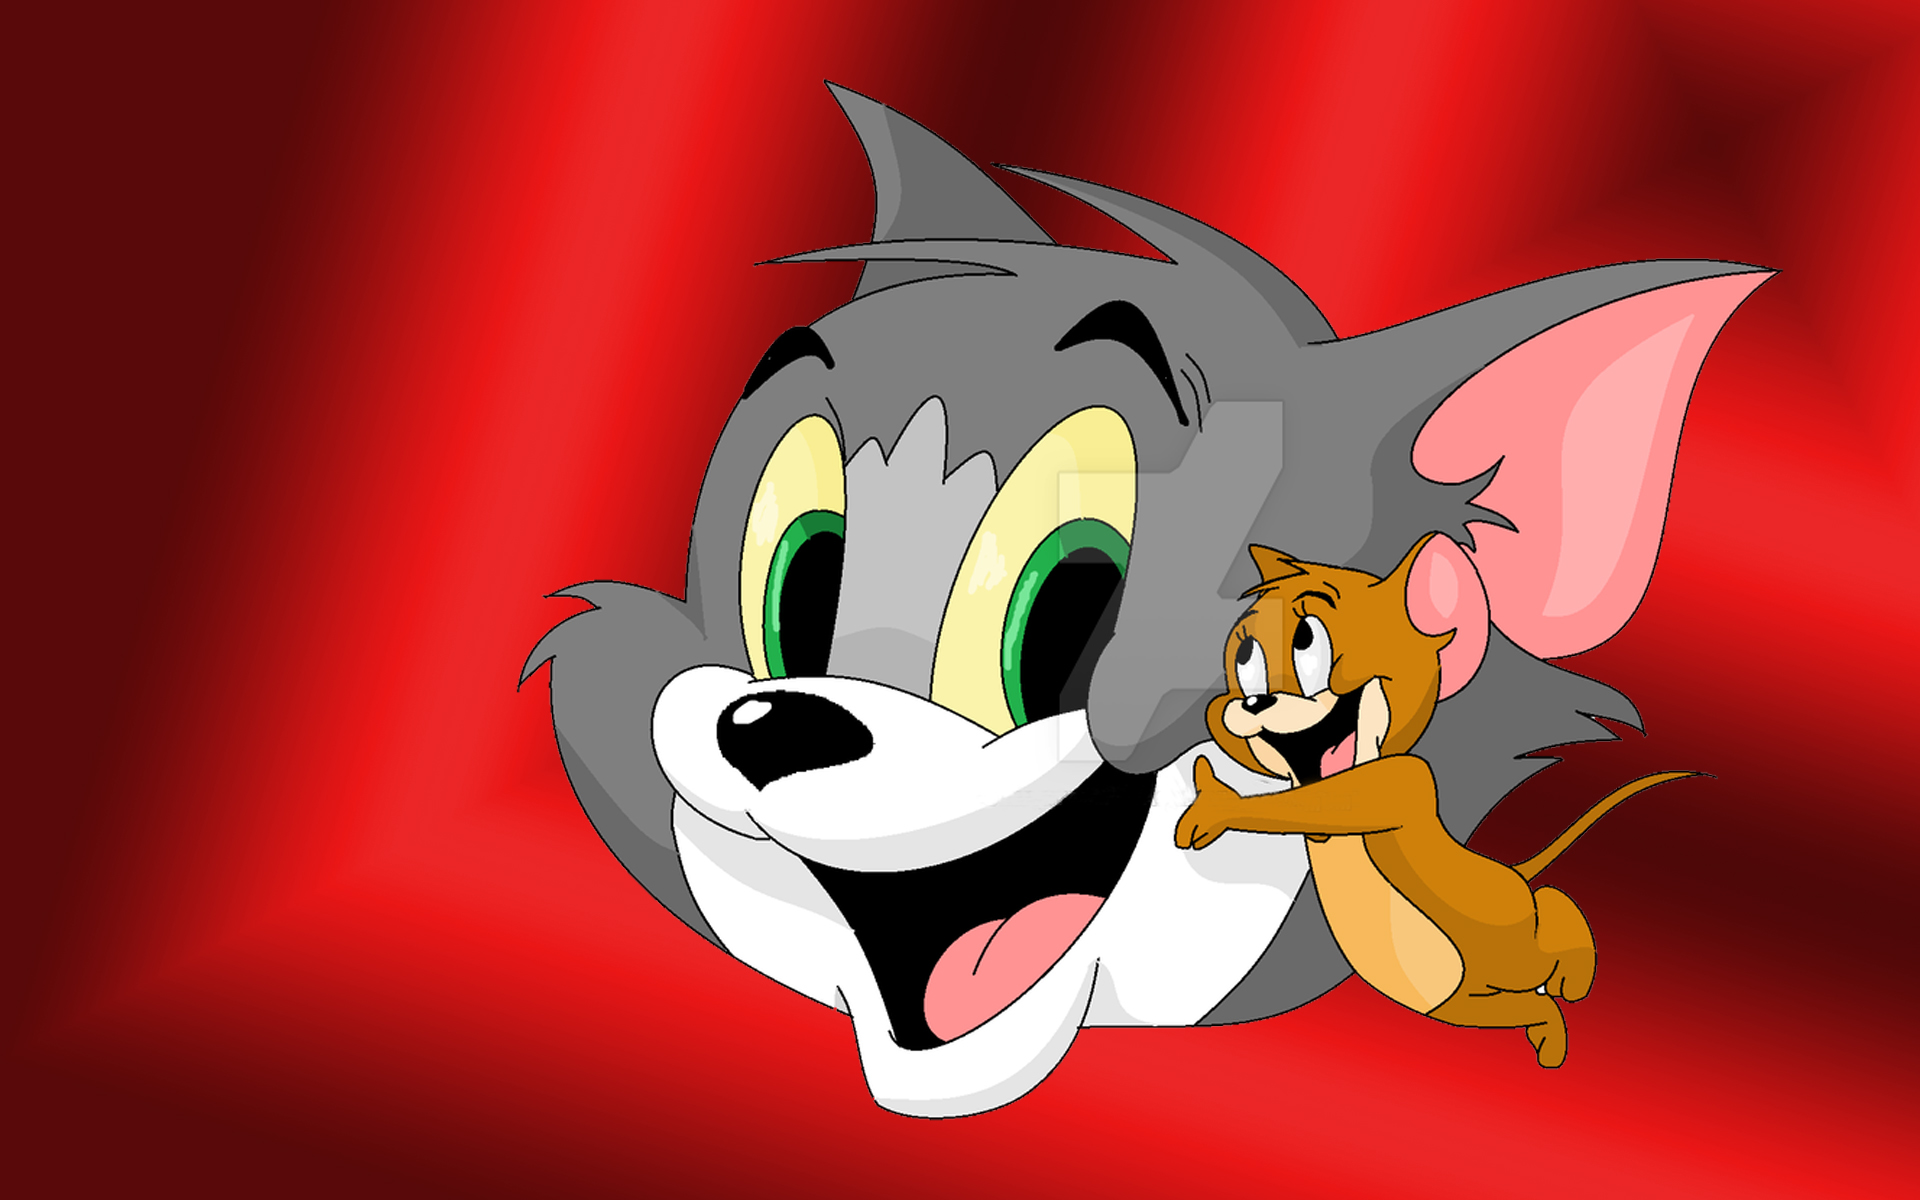 Tom And Jerry Picture Close Ups Hd Wallpaper 1920x1200 : Wallpapers13.com